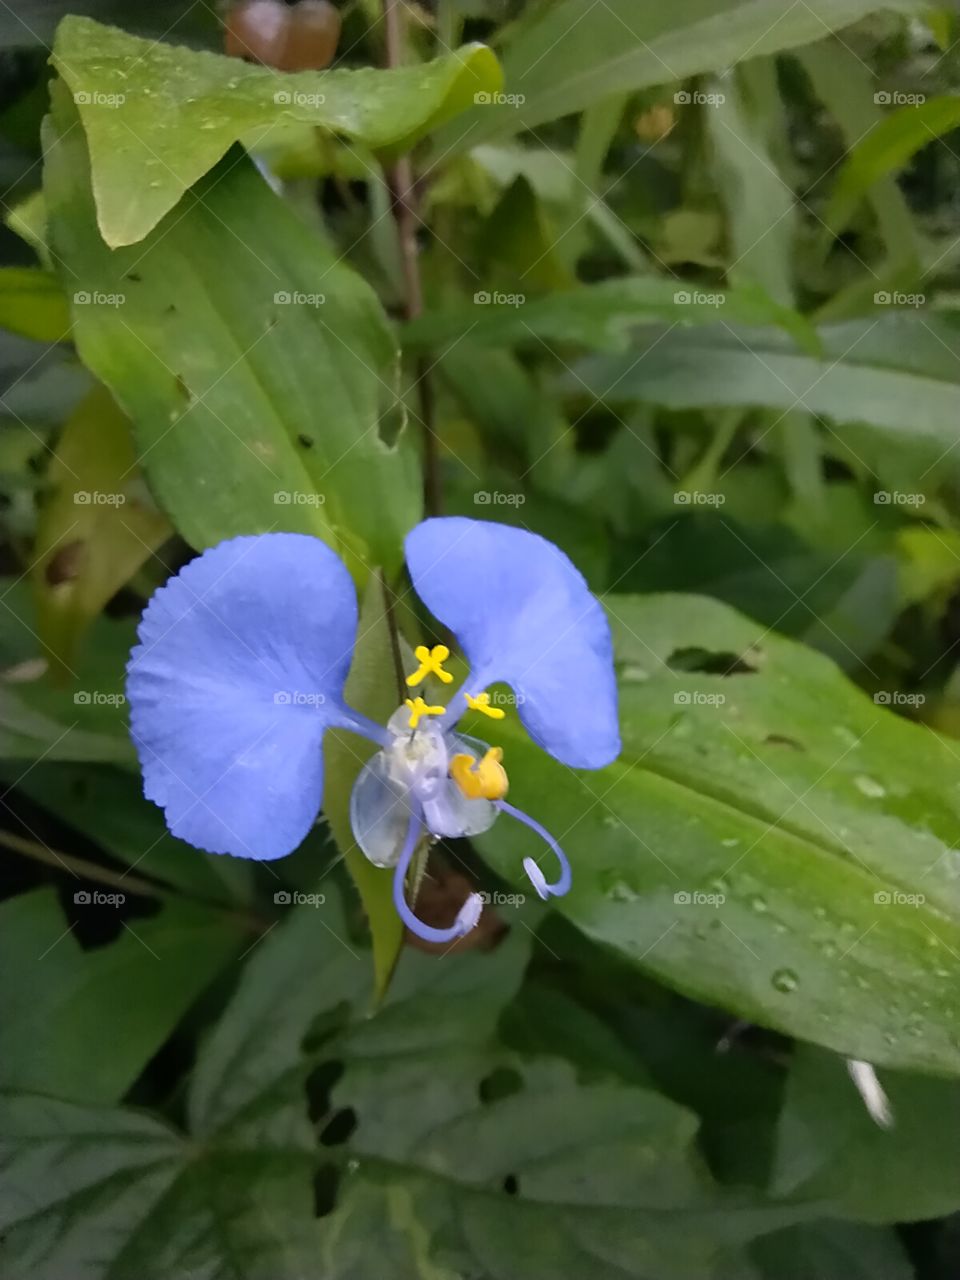 Insect like flower